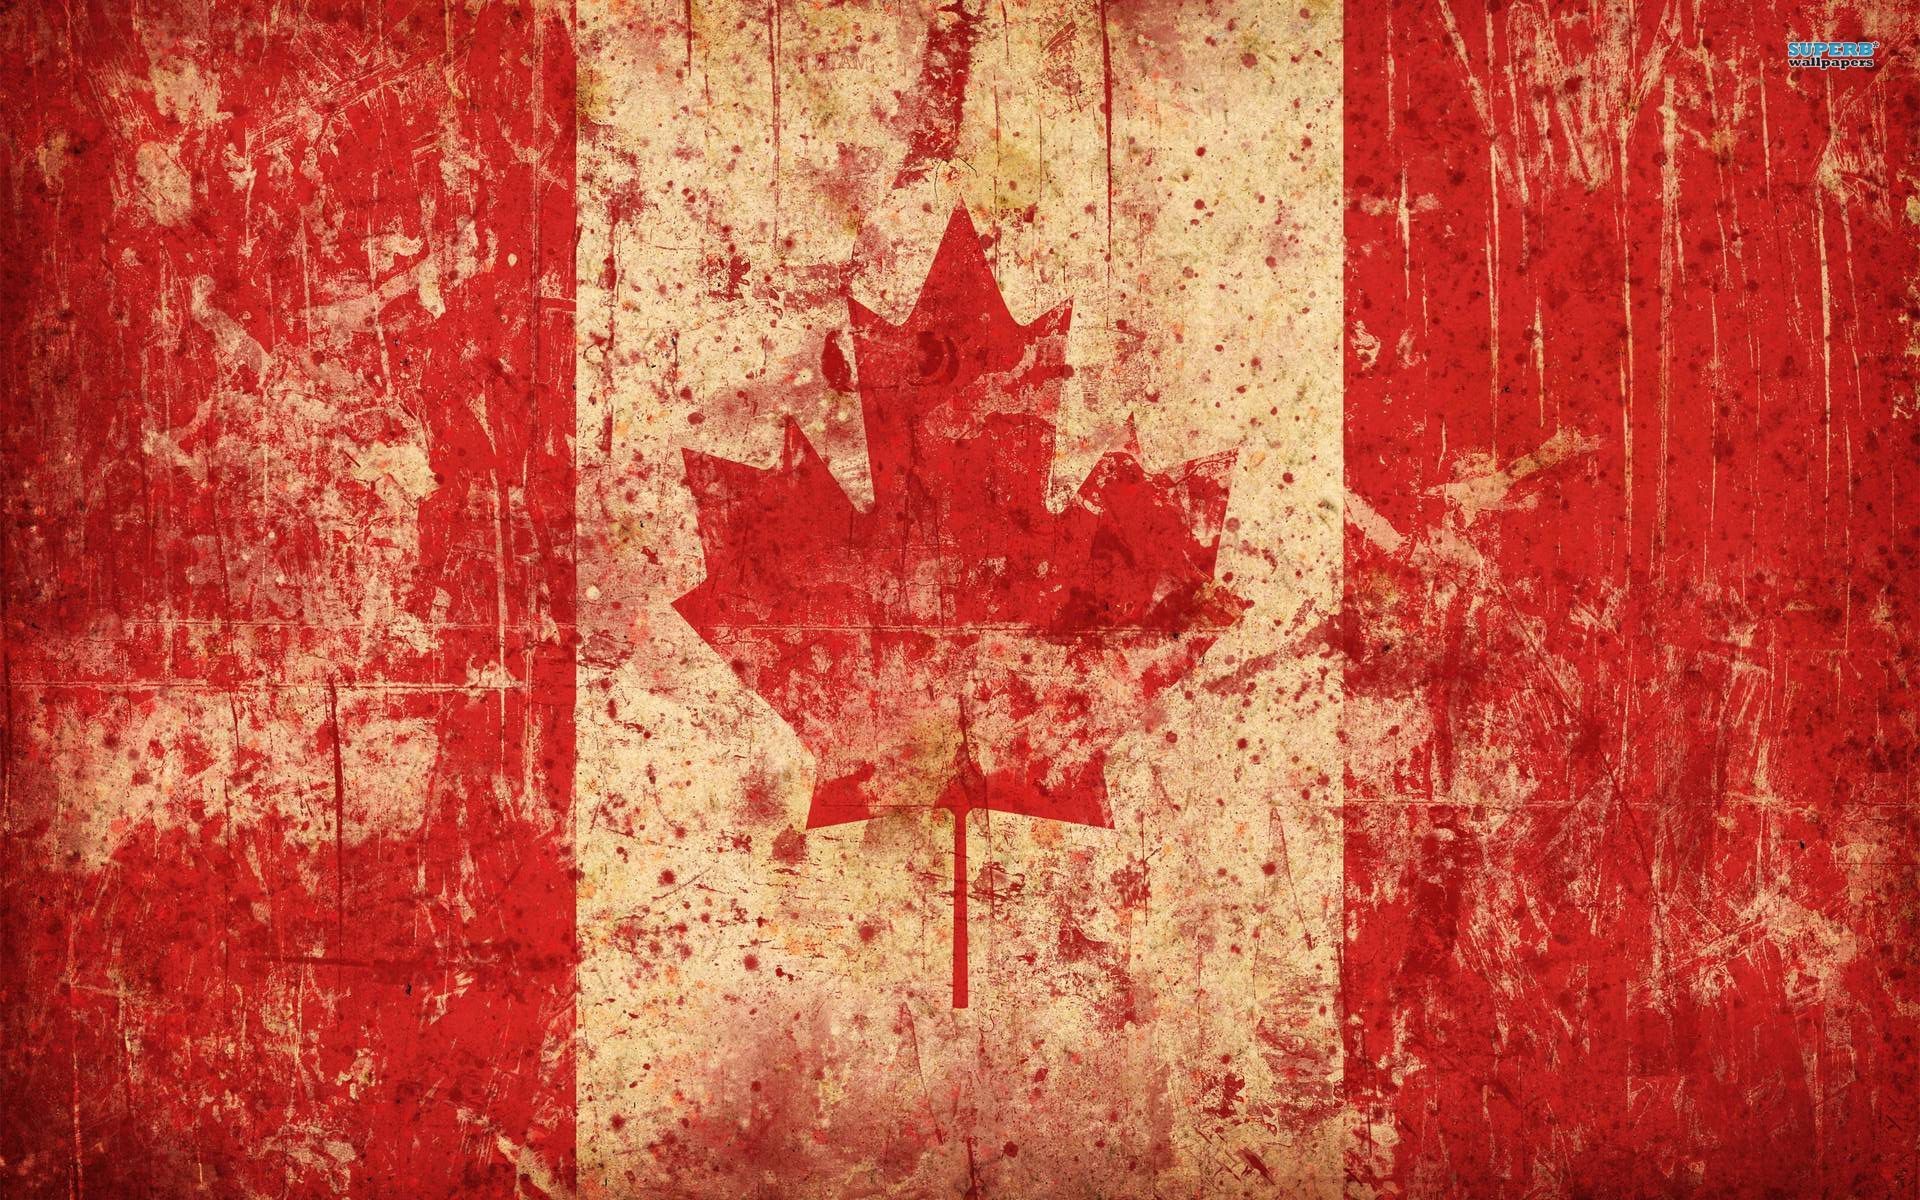 1920x1200 Grunge Canadian flag : Desktop and mobile wallpaper : Wallippo